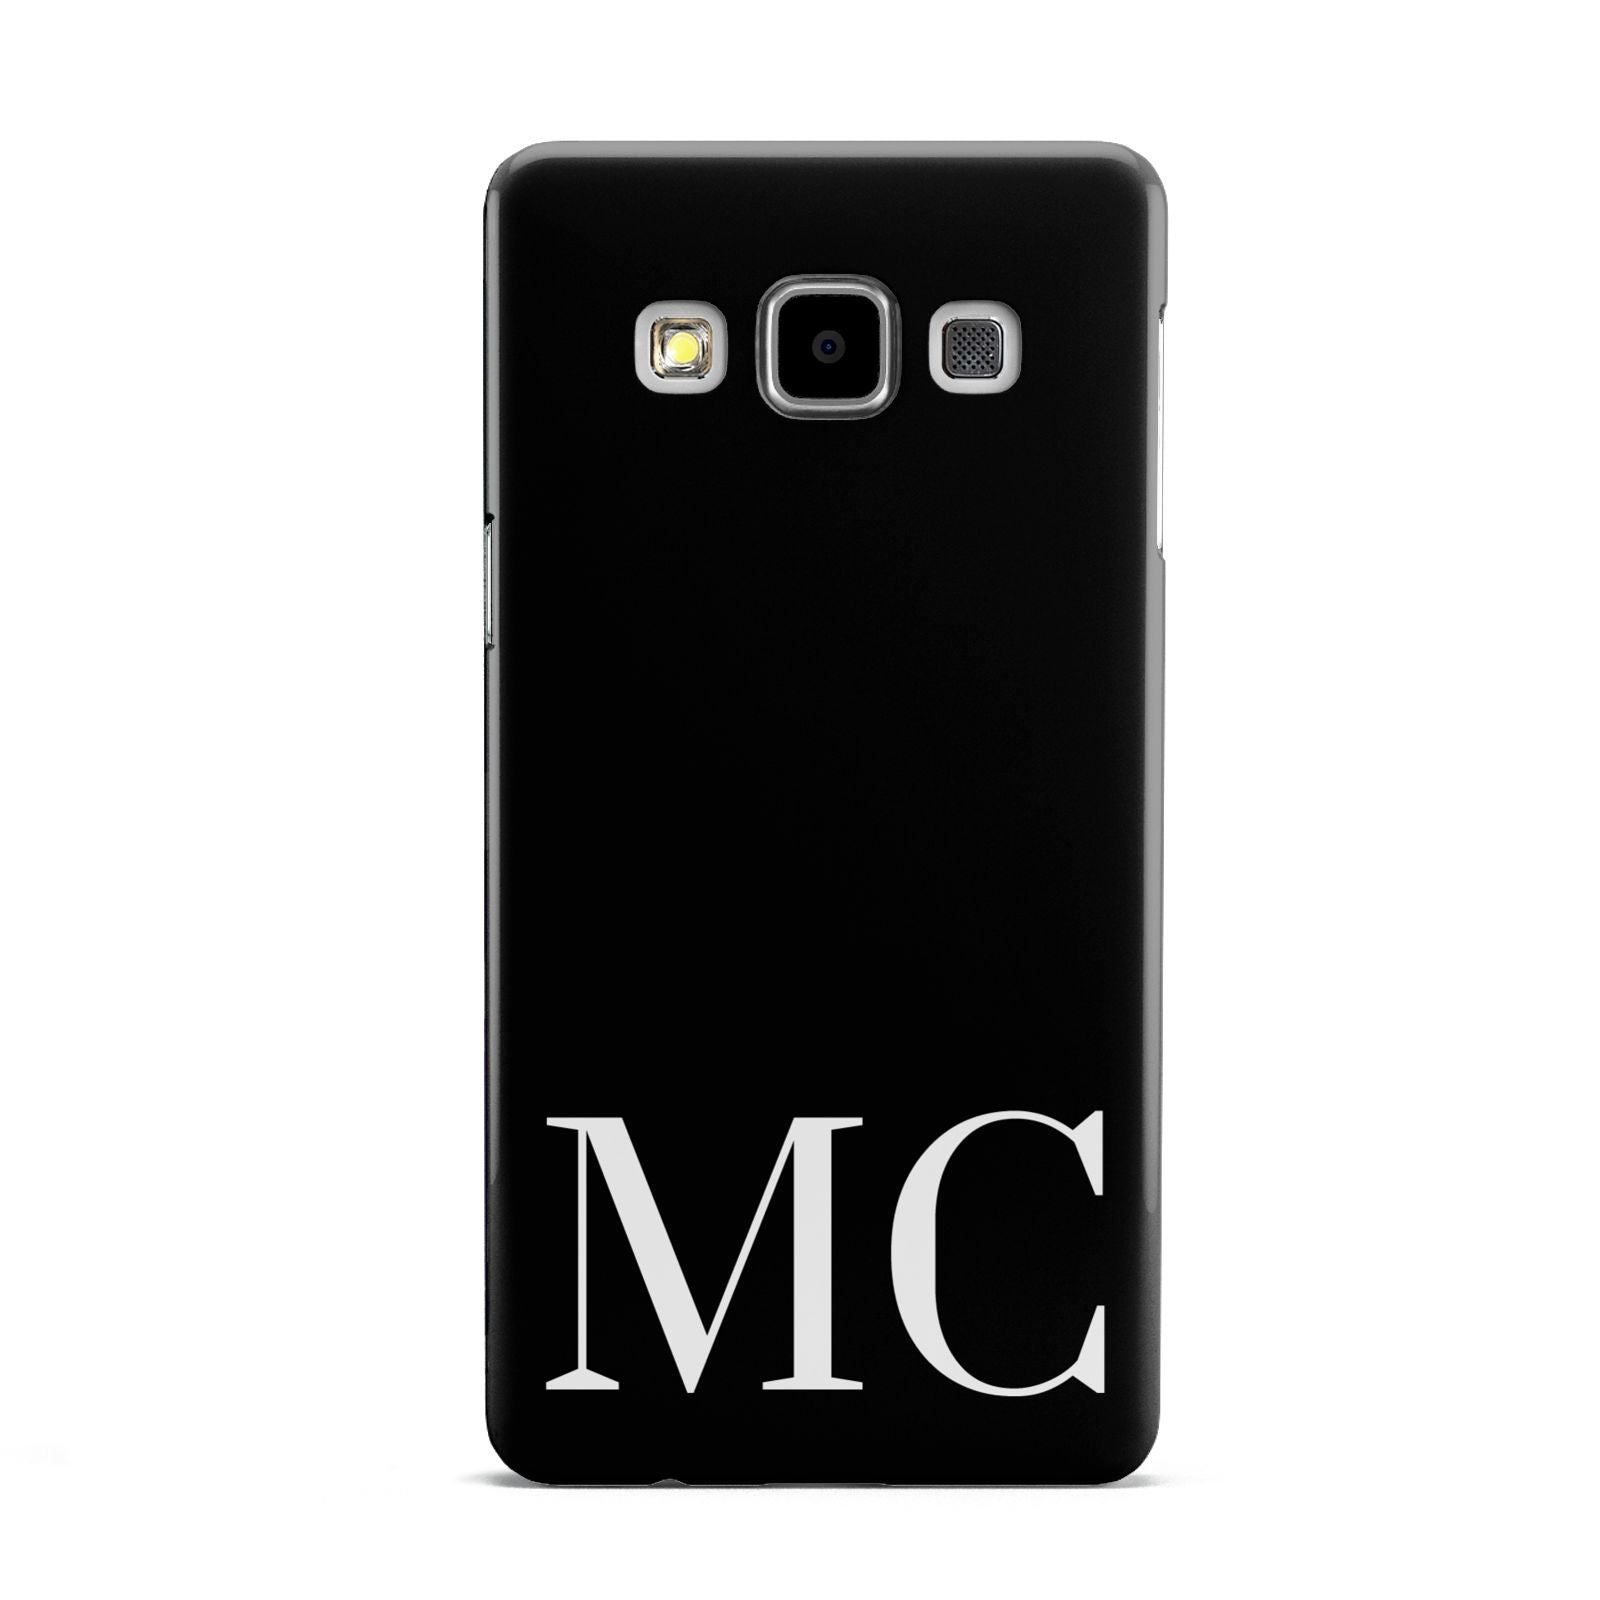 Initials Personalised 1 Samsung Galaxy A5 Case